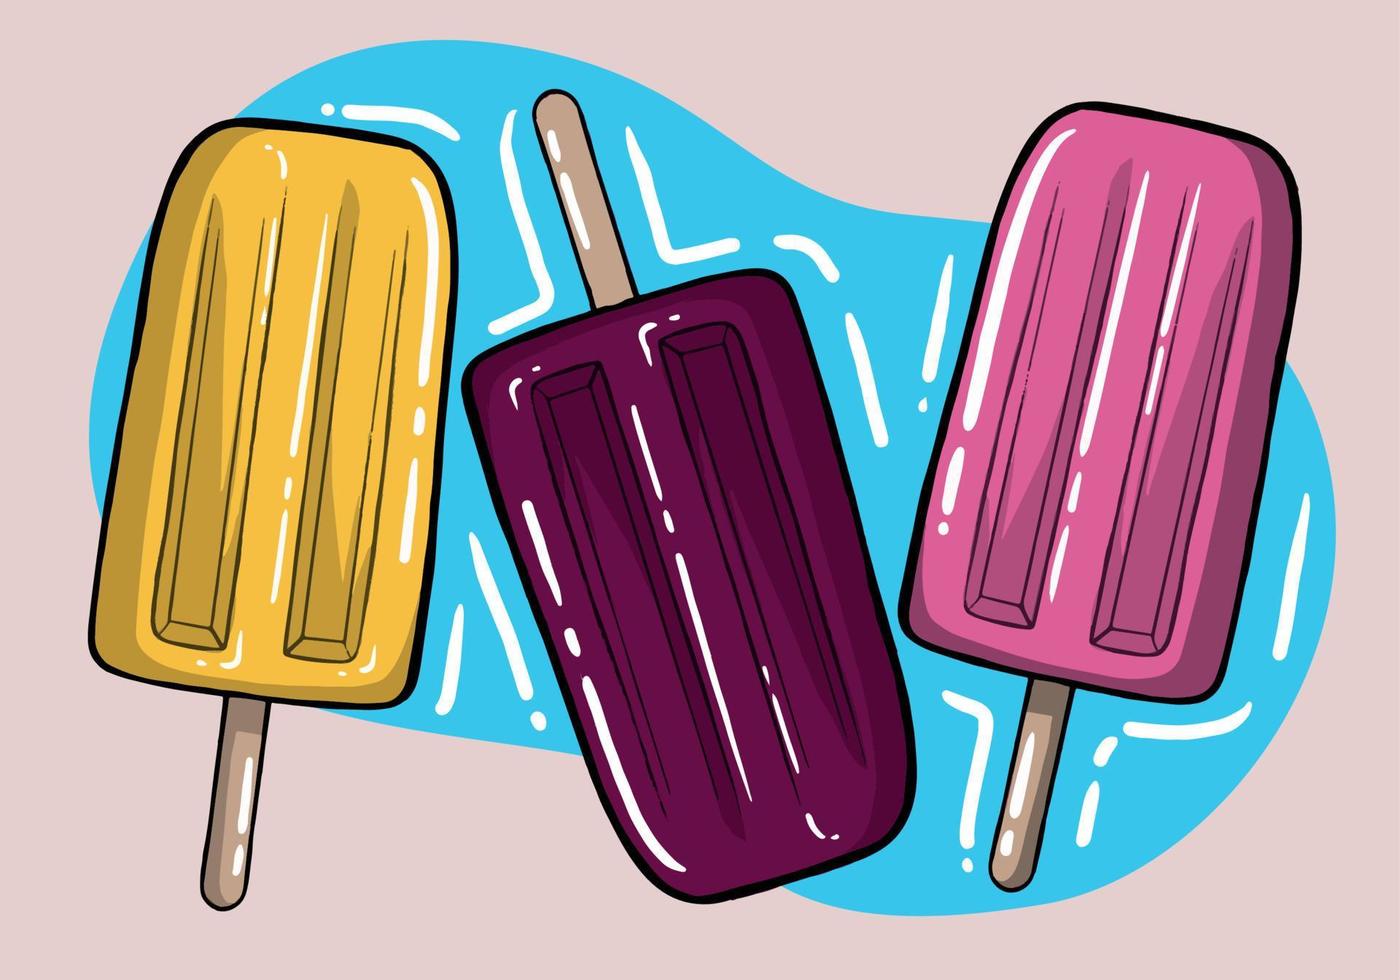 Refreshment ice-cream hand drawn vector set, three bright chocolate ice creams on a wooden stick in a different colors